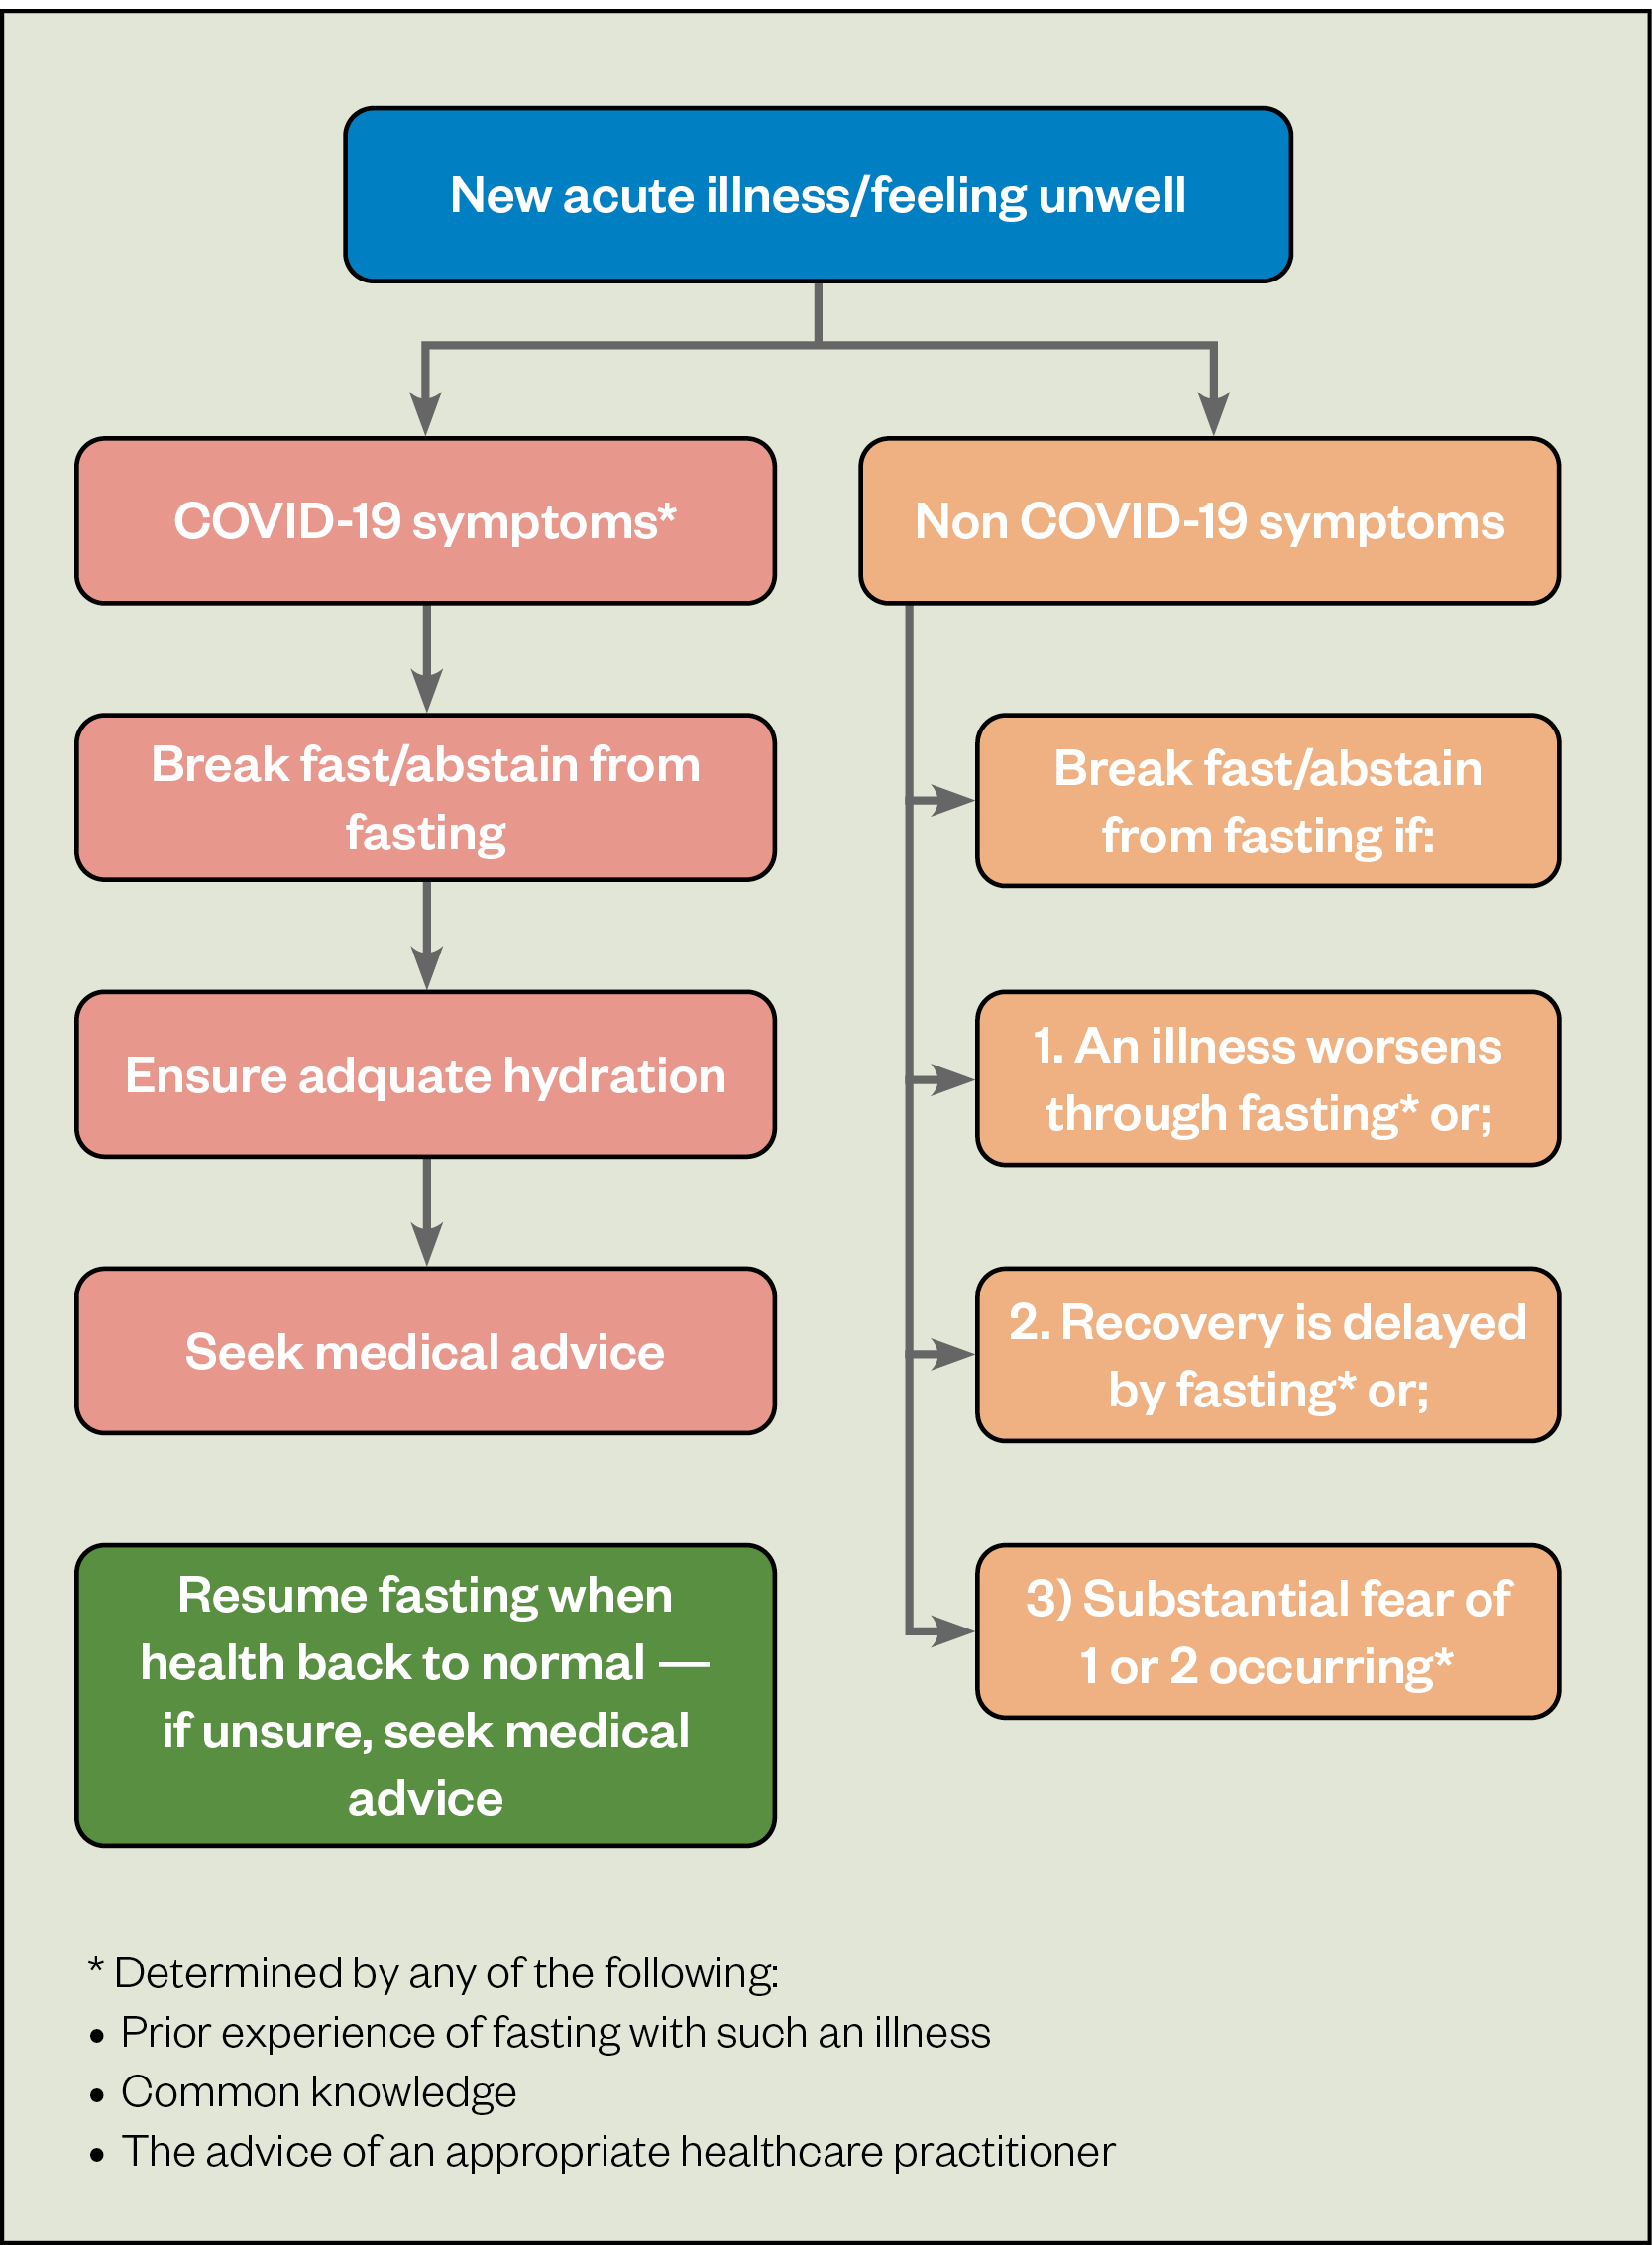 Figure 2: British Islamic Medical Association's recommendations on dealing with acute illness during Ramadan